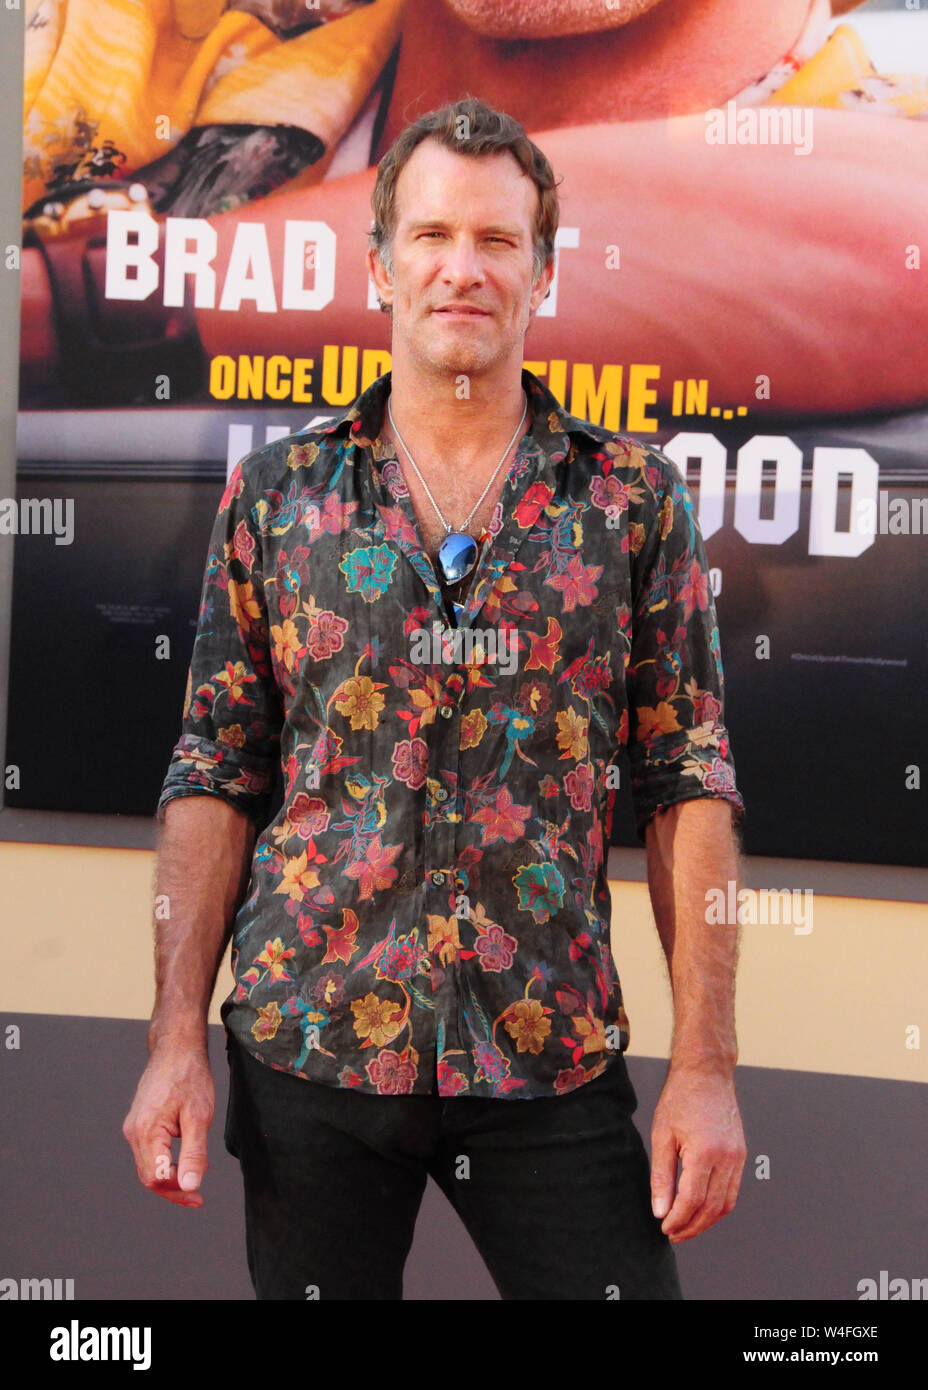 Hollywood, California, USA 22nd July 2019 Actor Thomas Jane attends Sony Pictures Presents the World Premiere of 'Once Upon A Time...In Hollywood' on July 22, 2019 at TCL Chinese Theatre in Hollywood, California, USA. Photo by Barry King/Alamy Live News Stock Photo